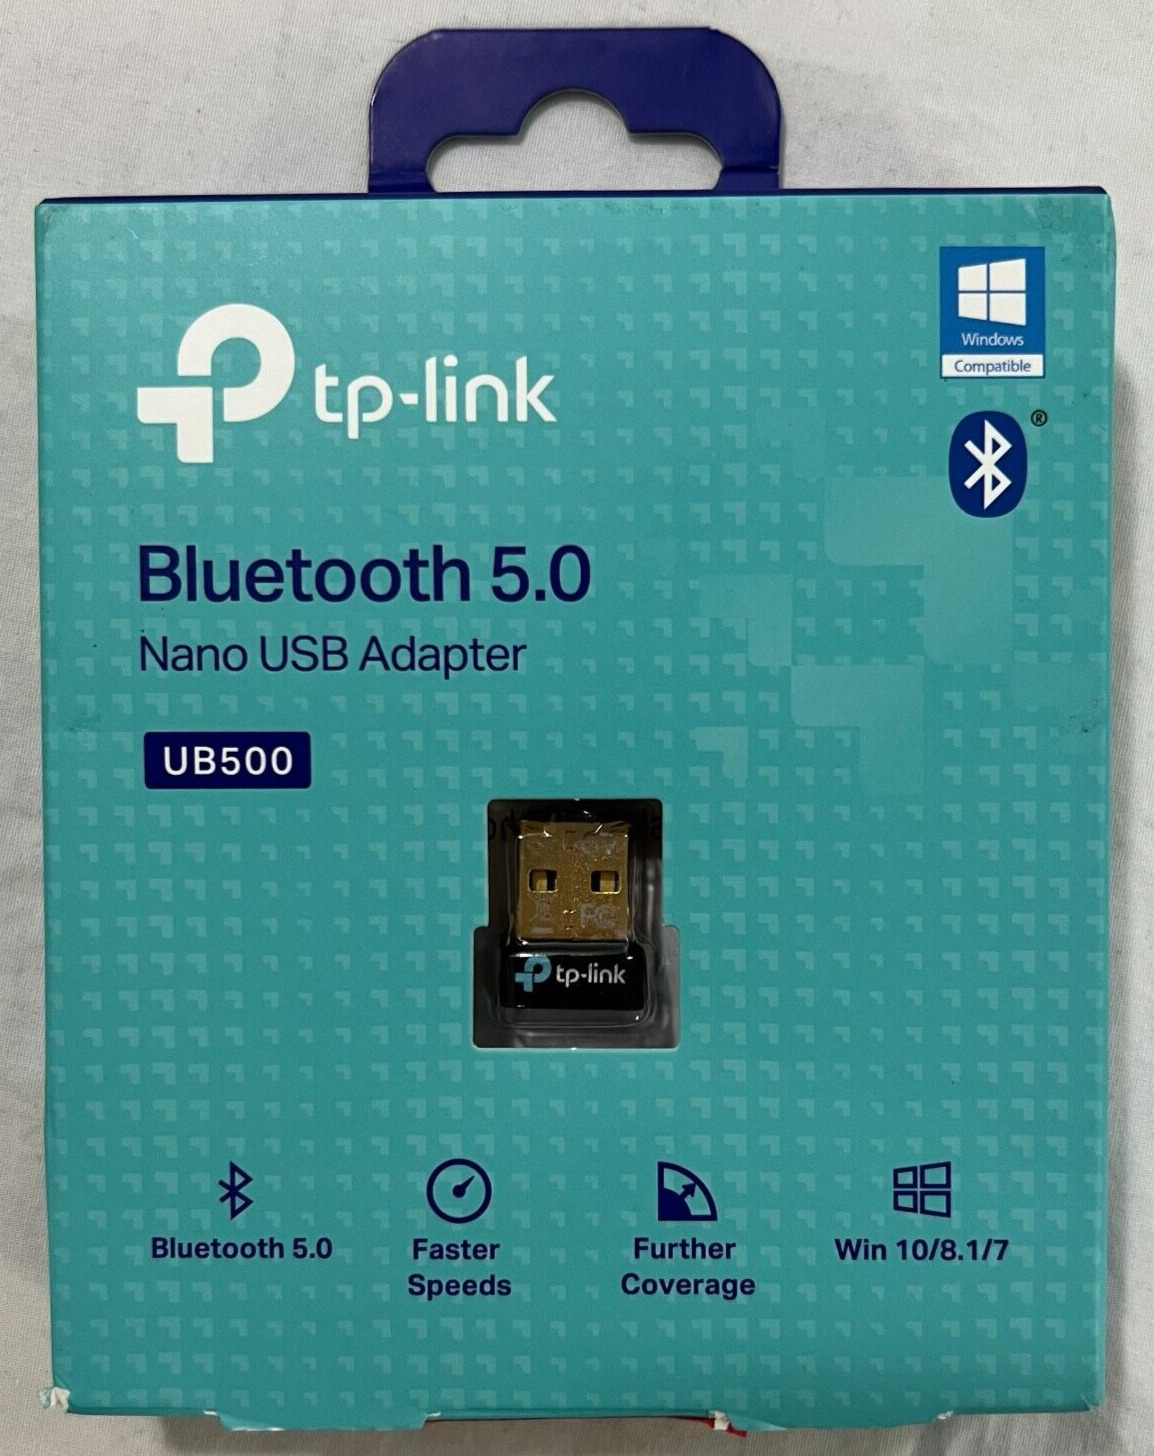 TP-Link UB500 Bluetooth 5.0 Wireless USB Dongle Adapter for PC Computer/XBox/PS4